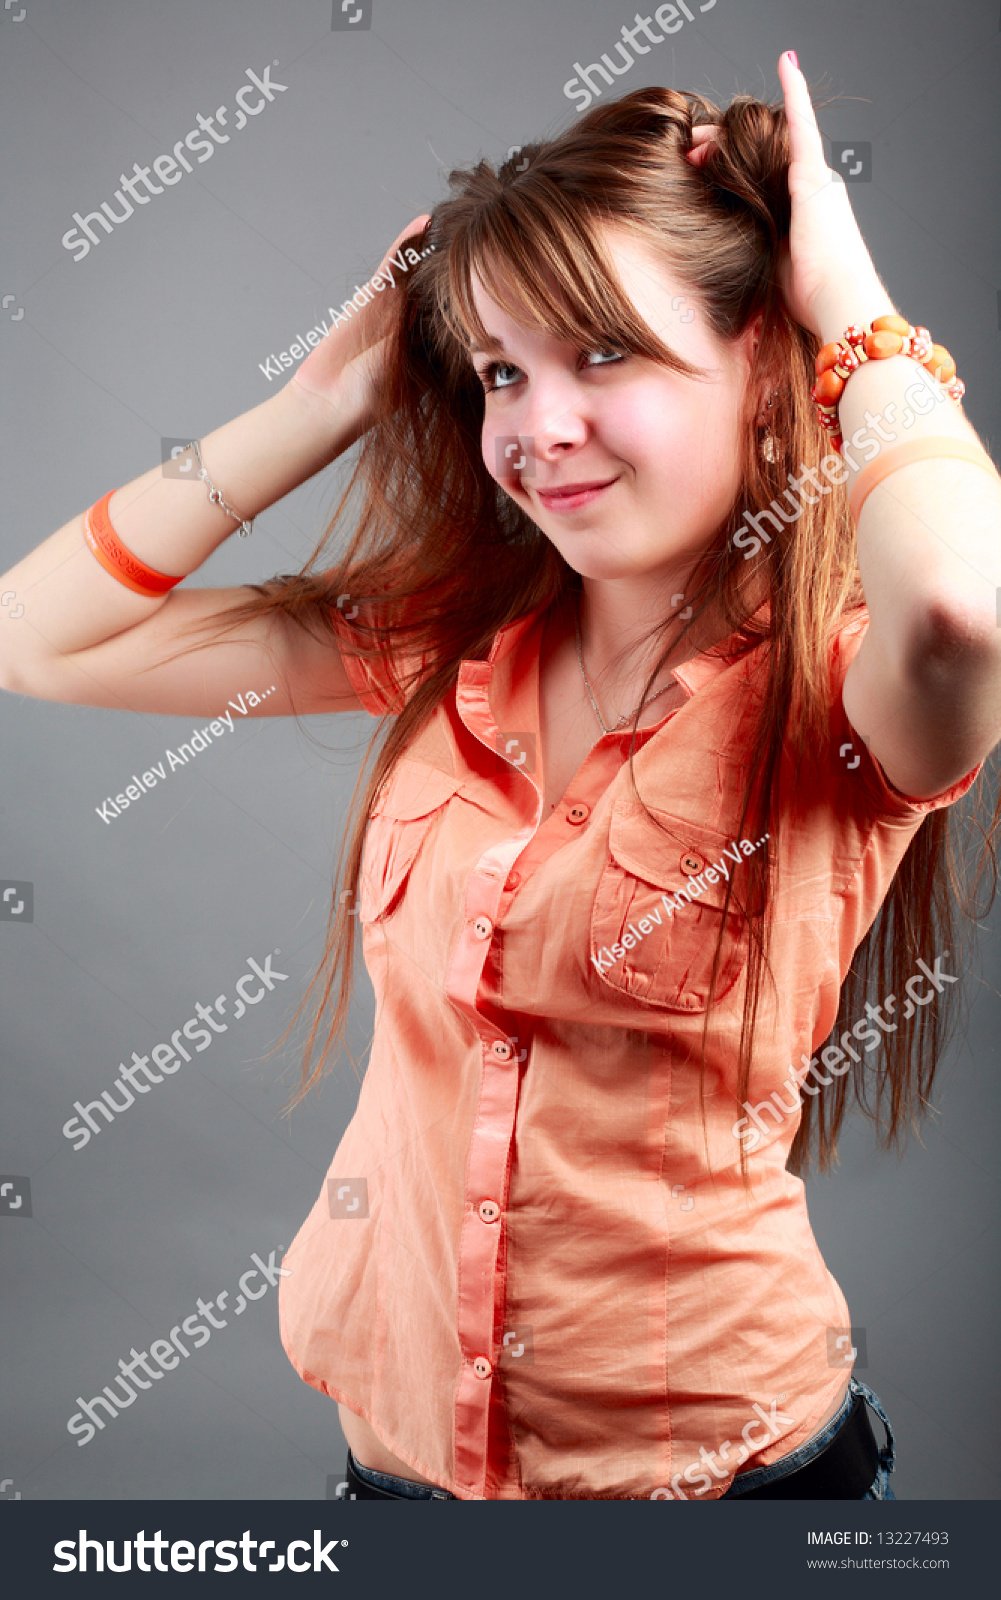 Portrait Of A Styled Professional Model. Theme: Teens, Beauty. Stock ...